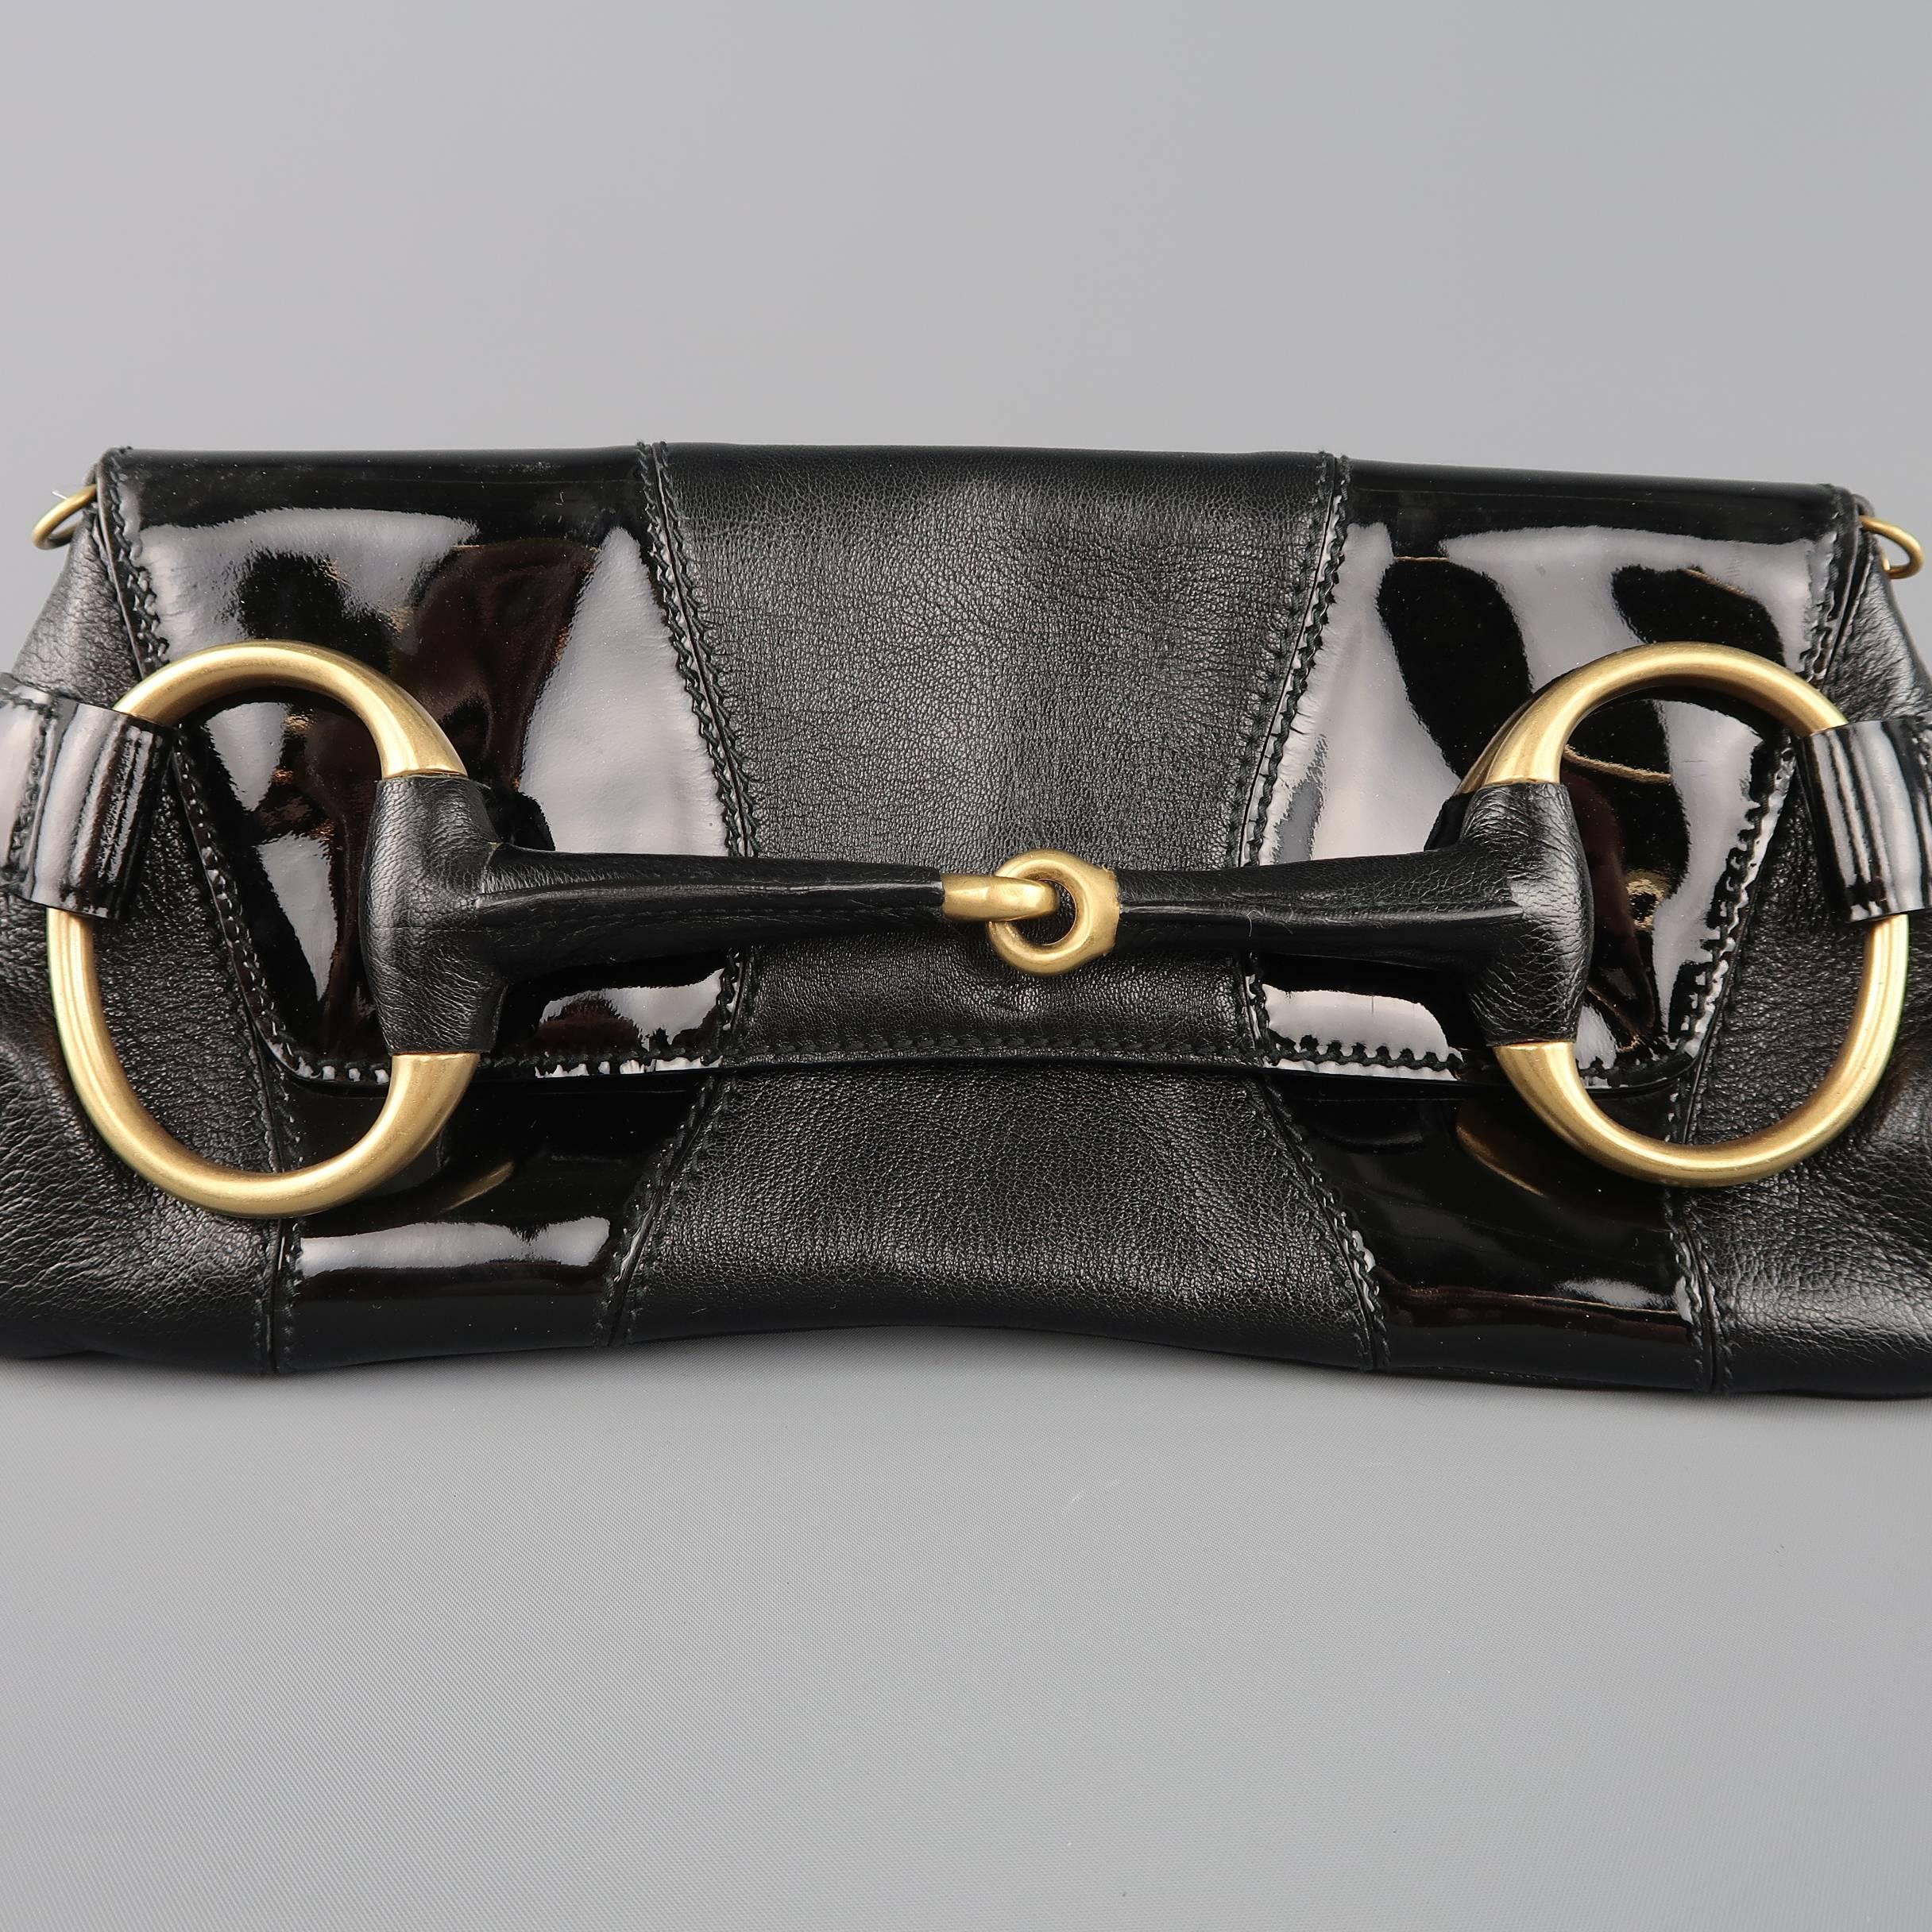 GUCCI clutch bag comes in textured black leather with patent leather panels and features a flap closure, oversized gold tone horsebit, and detachable chain shoulder strap. Made in Italy.
 
Good Pre-Owned Condition.
 
Measurements:
 
Length: 15